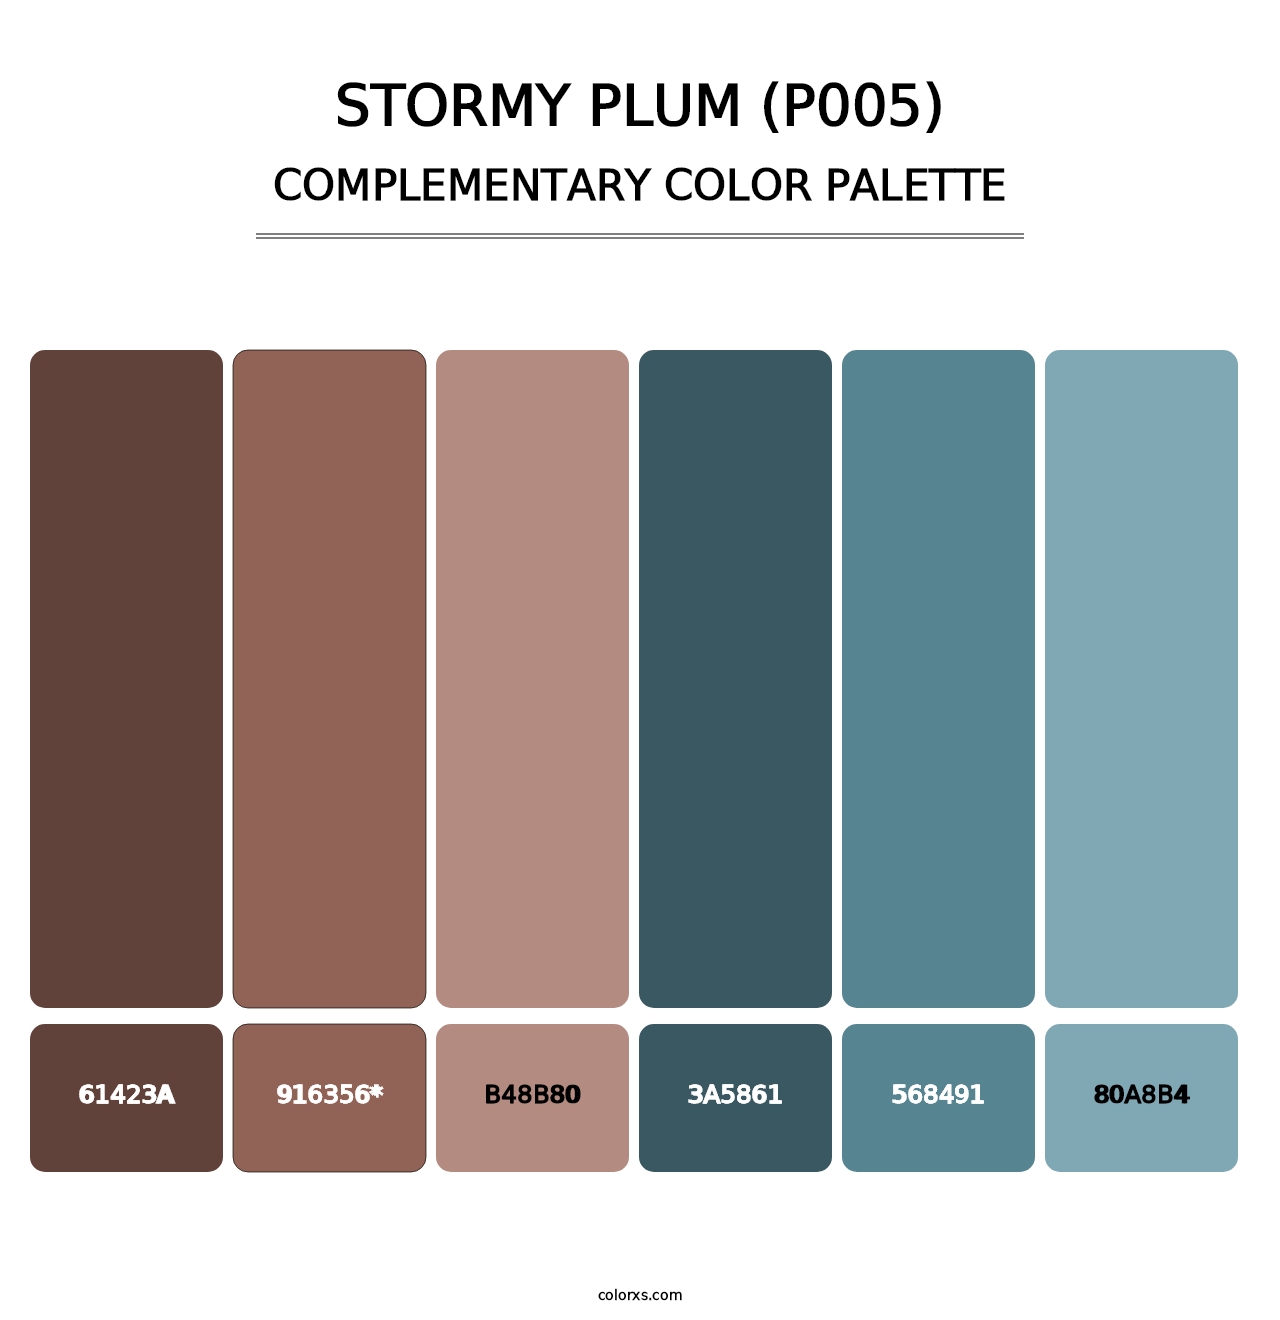 Stormy Plum (P005) - Complementary Color Palette